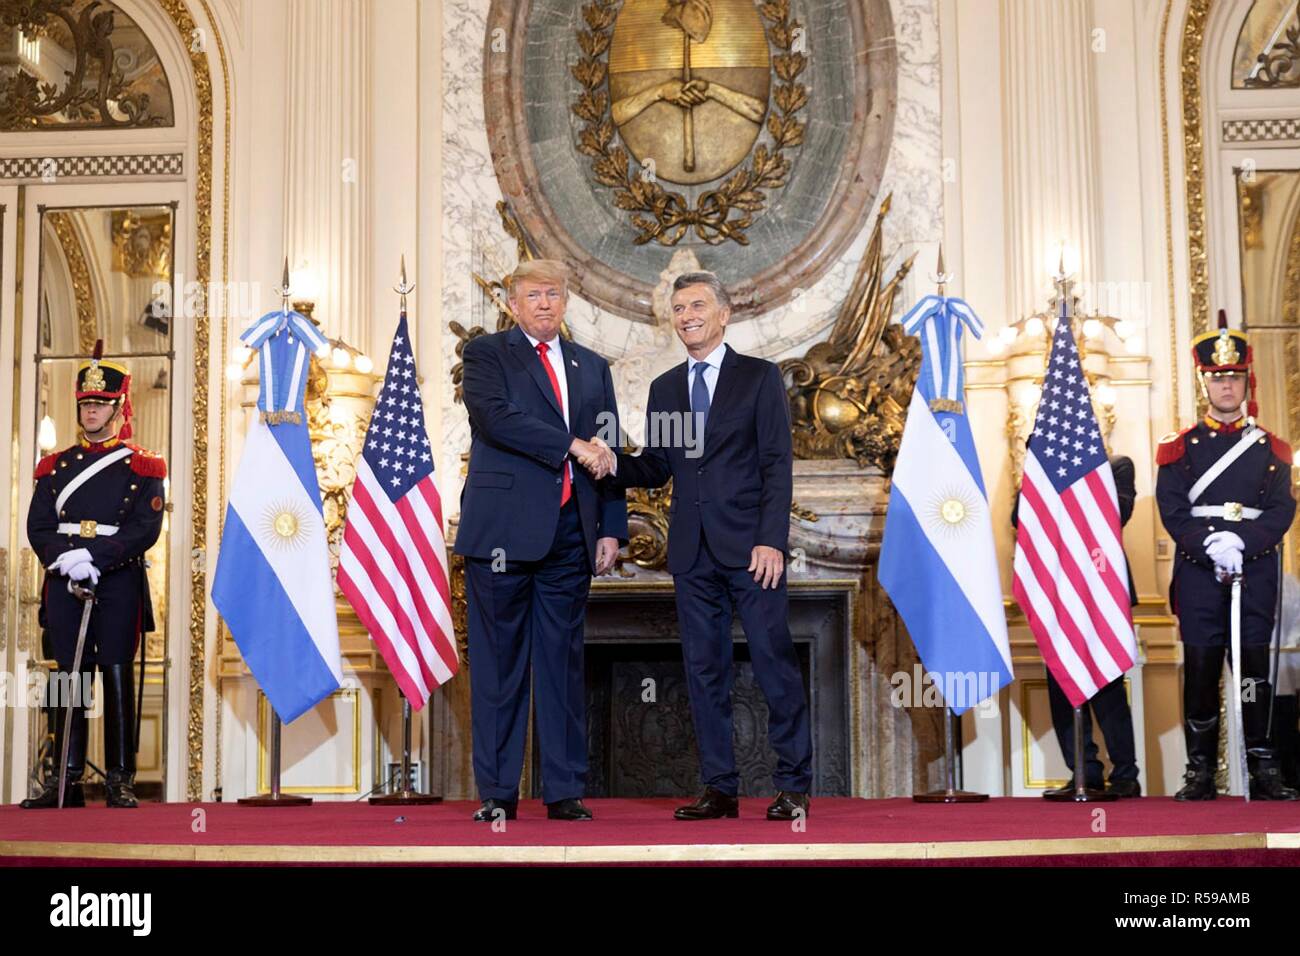 U.S. President Donald Trump shakes hands with Argentine President Mauricio Macri, right, before the start of a bilateral meeting on the sidelines of the G20 Summit meeting at the Casa Rosada November 30, 2018 in Buenos Aires, Argentina. Stock Photo